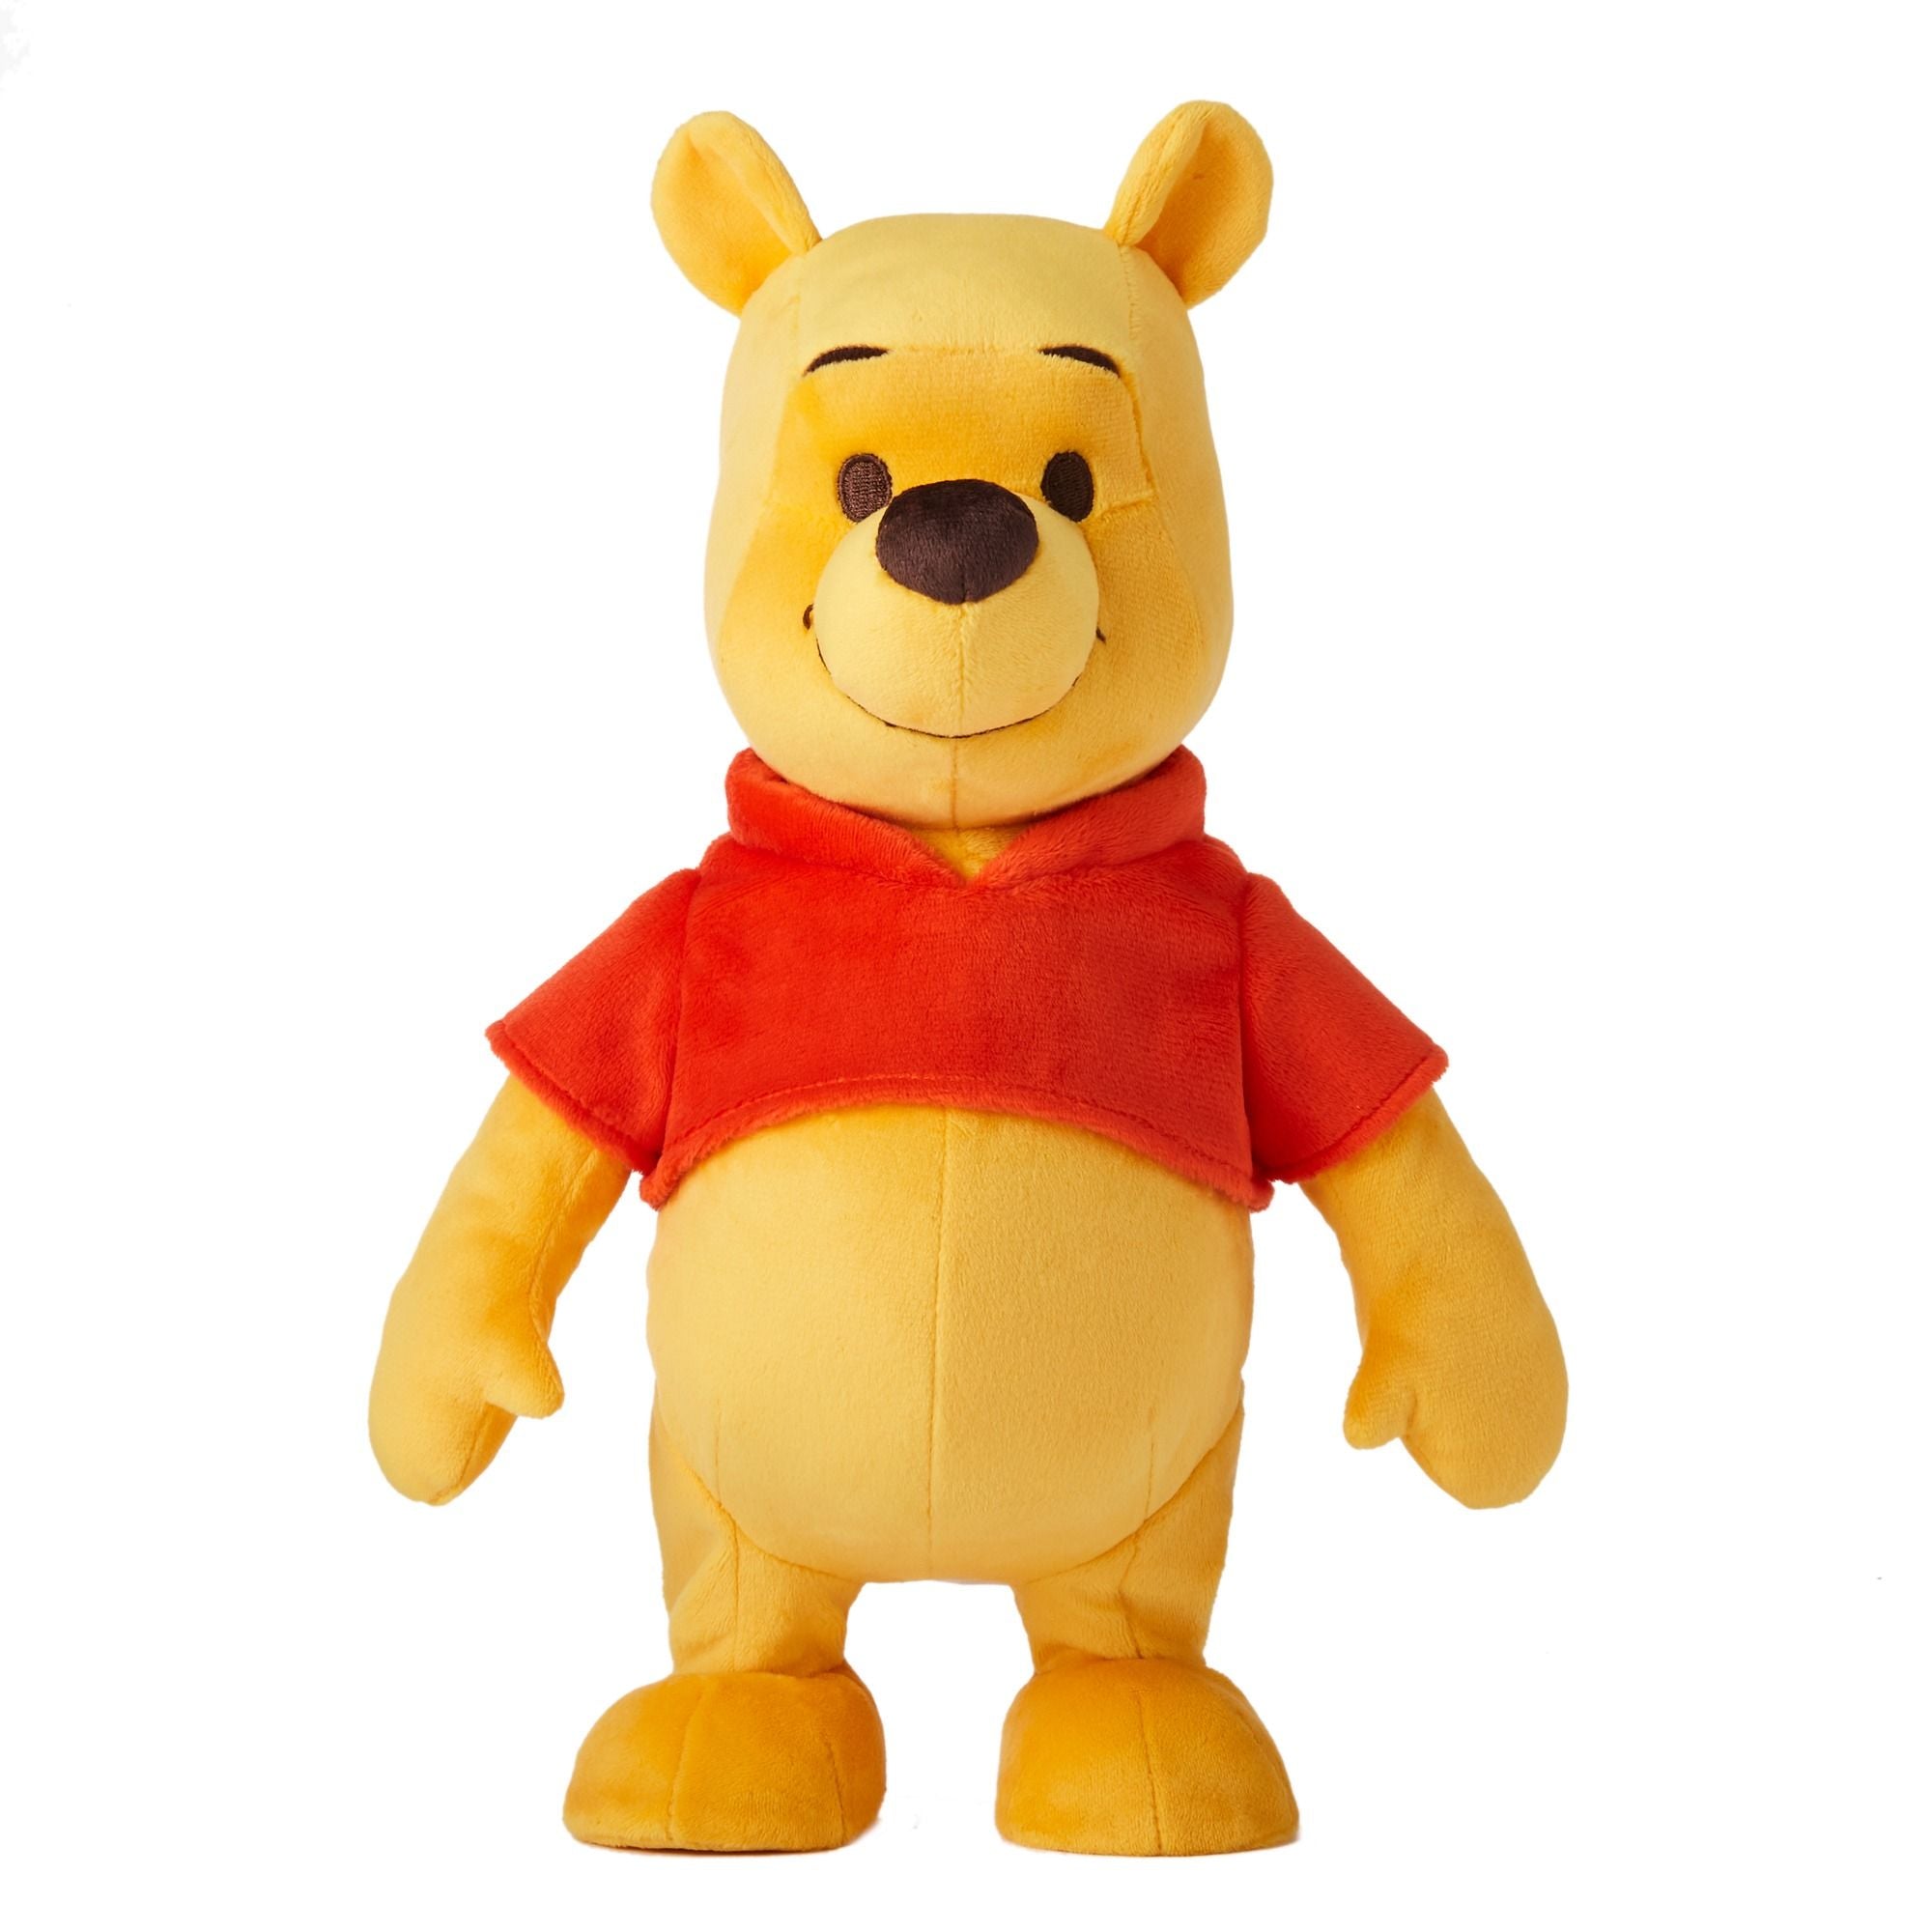 Fisher Price Winnie The Pooh - Albagame